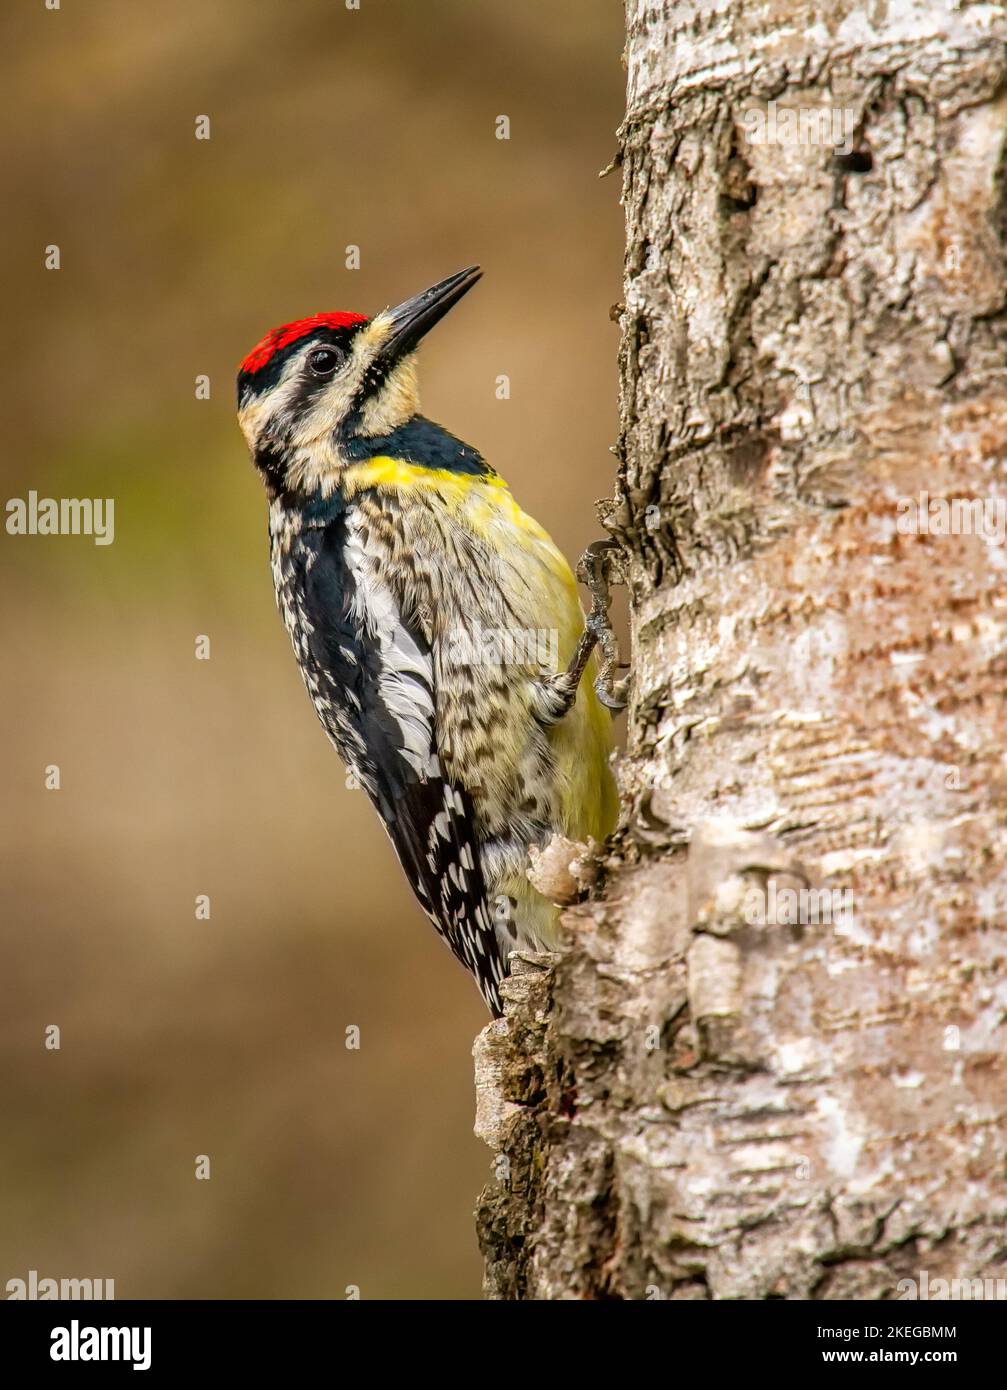 A beautiful and brightly colored Yellow-bellied Sapsucker photographed as it perched on the side of a northwoods birch tree. Stock Photo